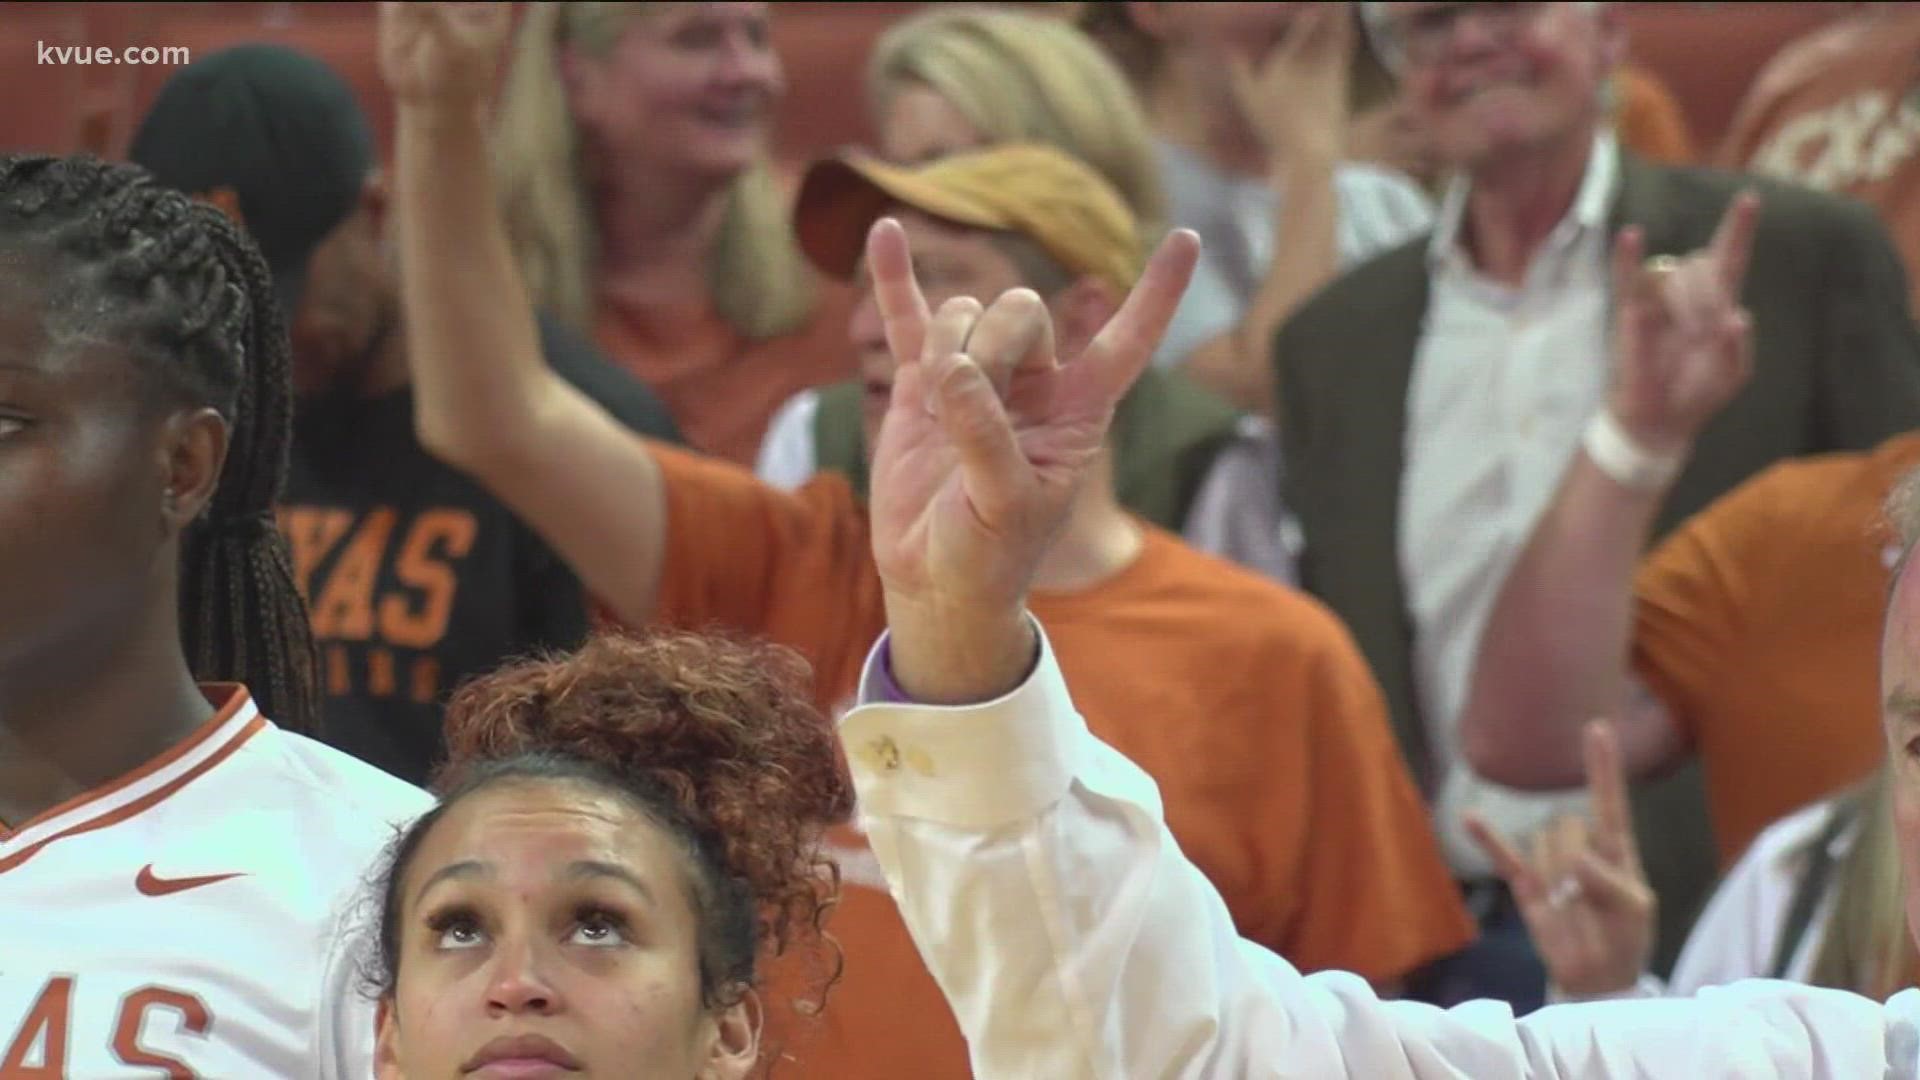 UT women's basketball will not play Alcorn State due to COVID protocols at Texas.